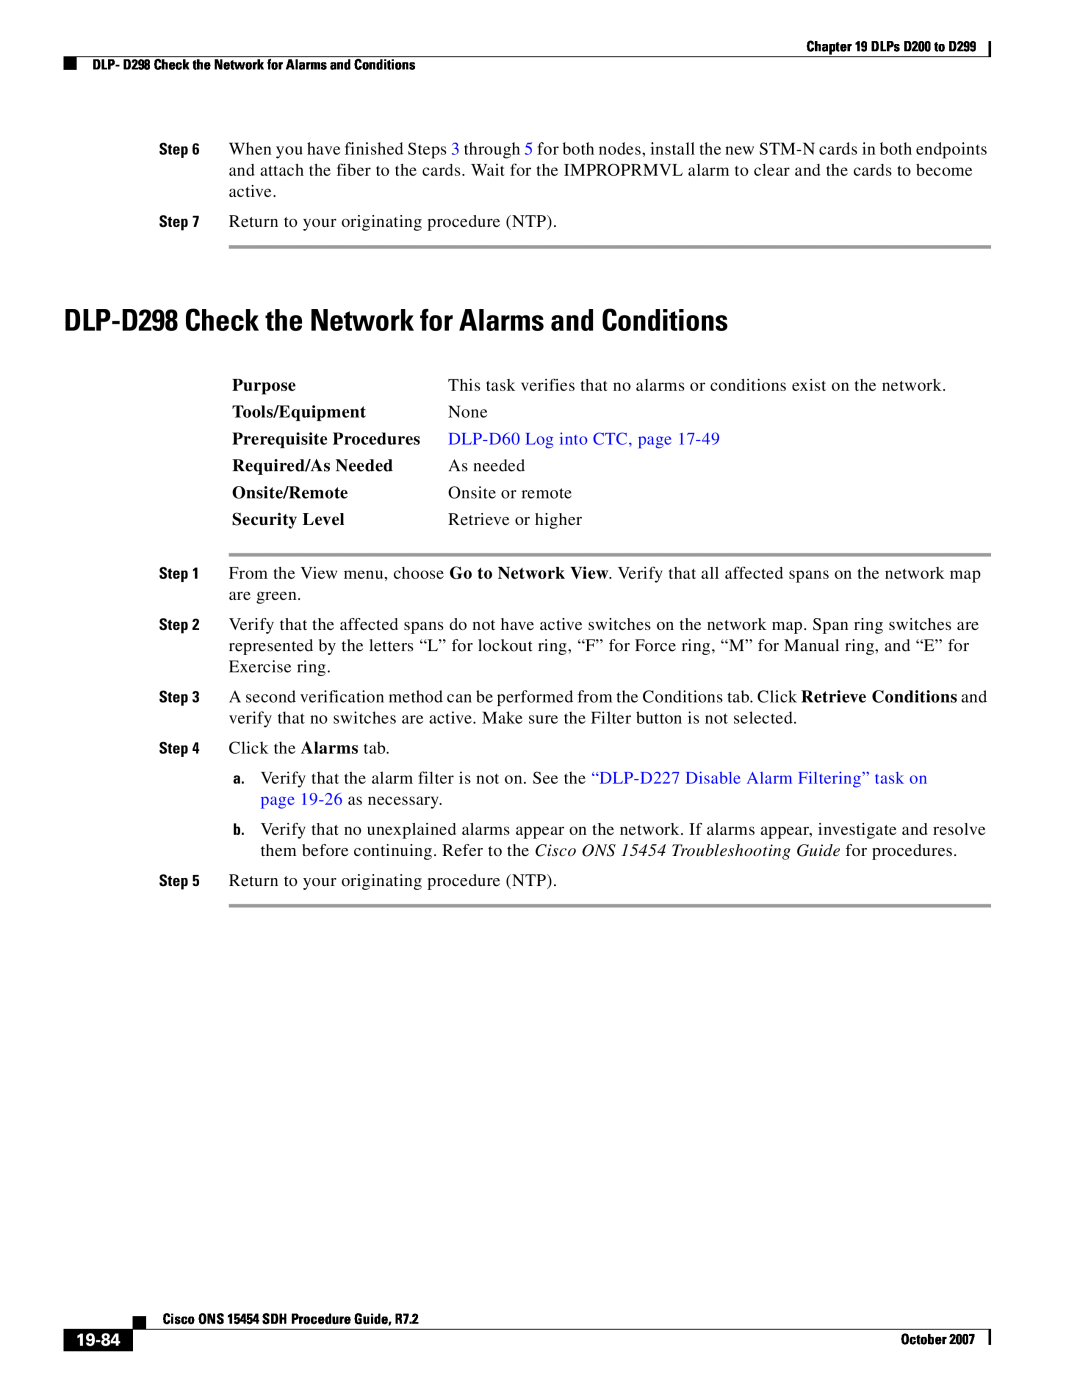 Cisco Systems D200 manual DLP-D298 Check the Network for Alarms and Conditions, 19-84, DLP-D60 Log into CTC, page 